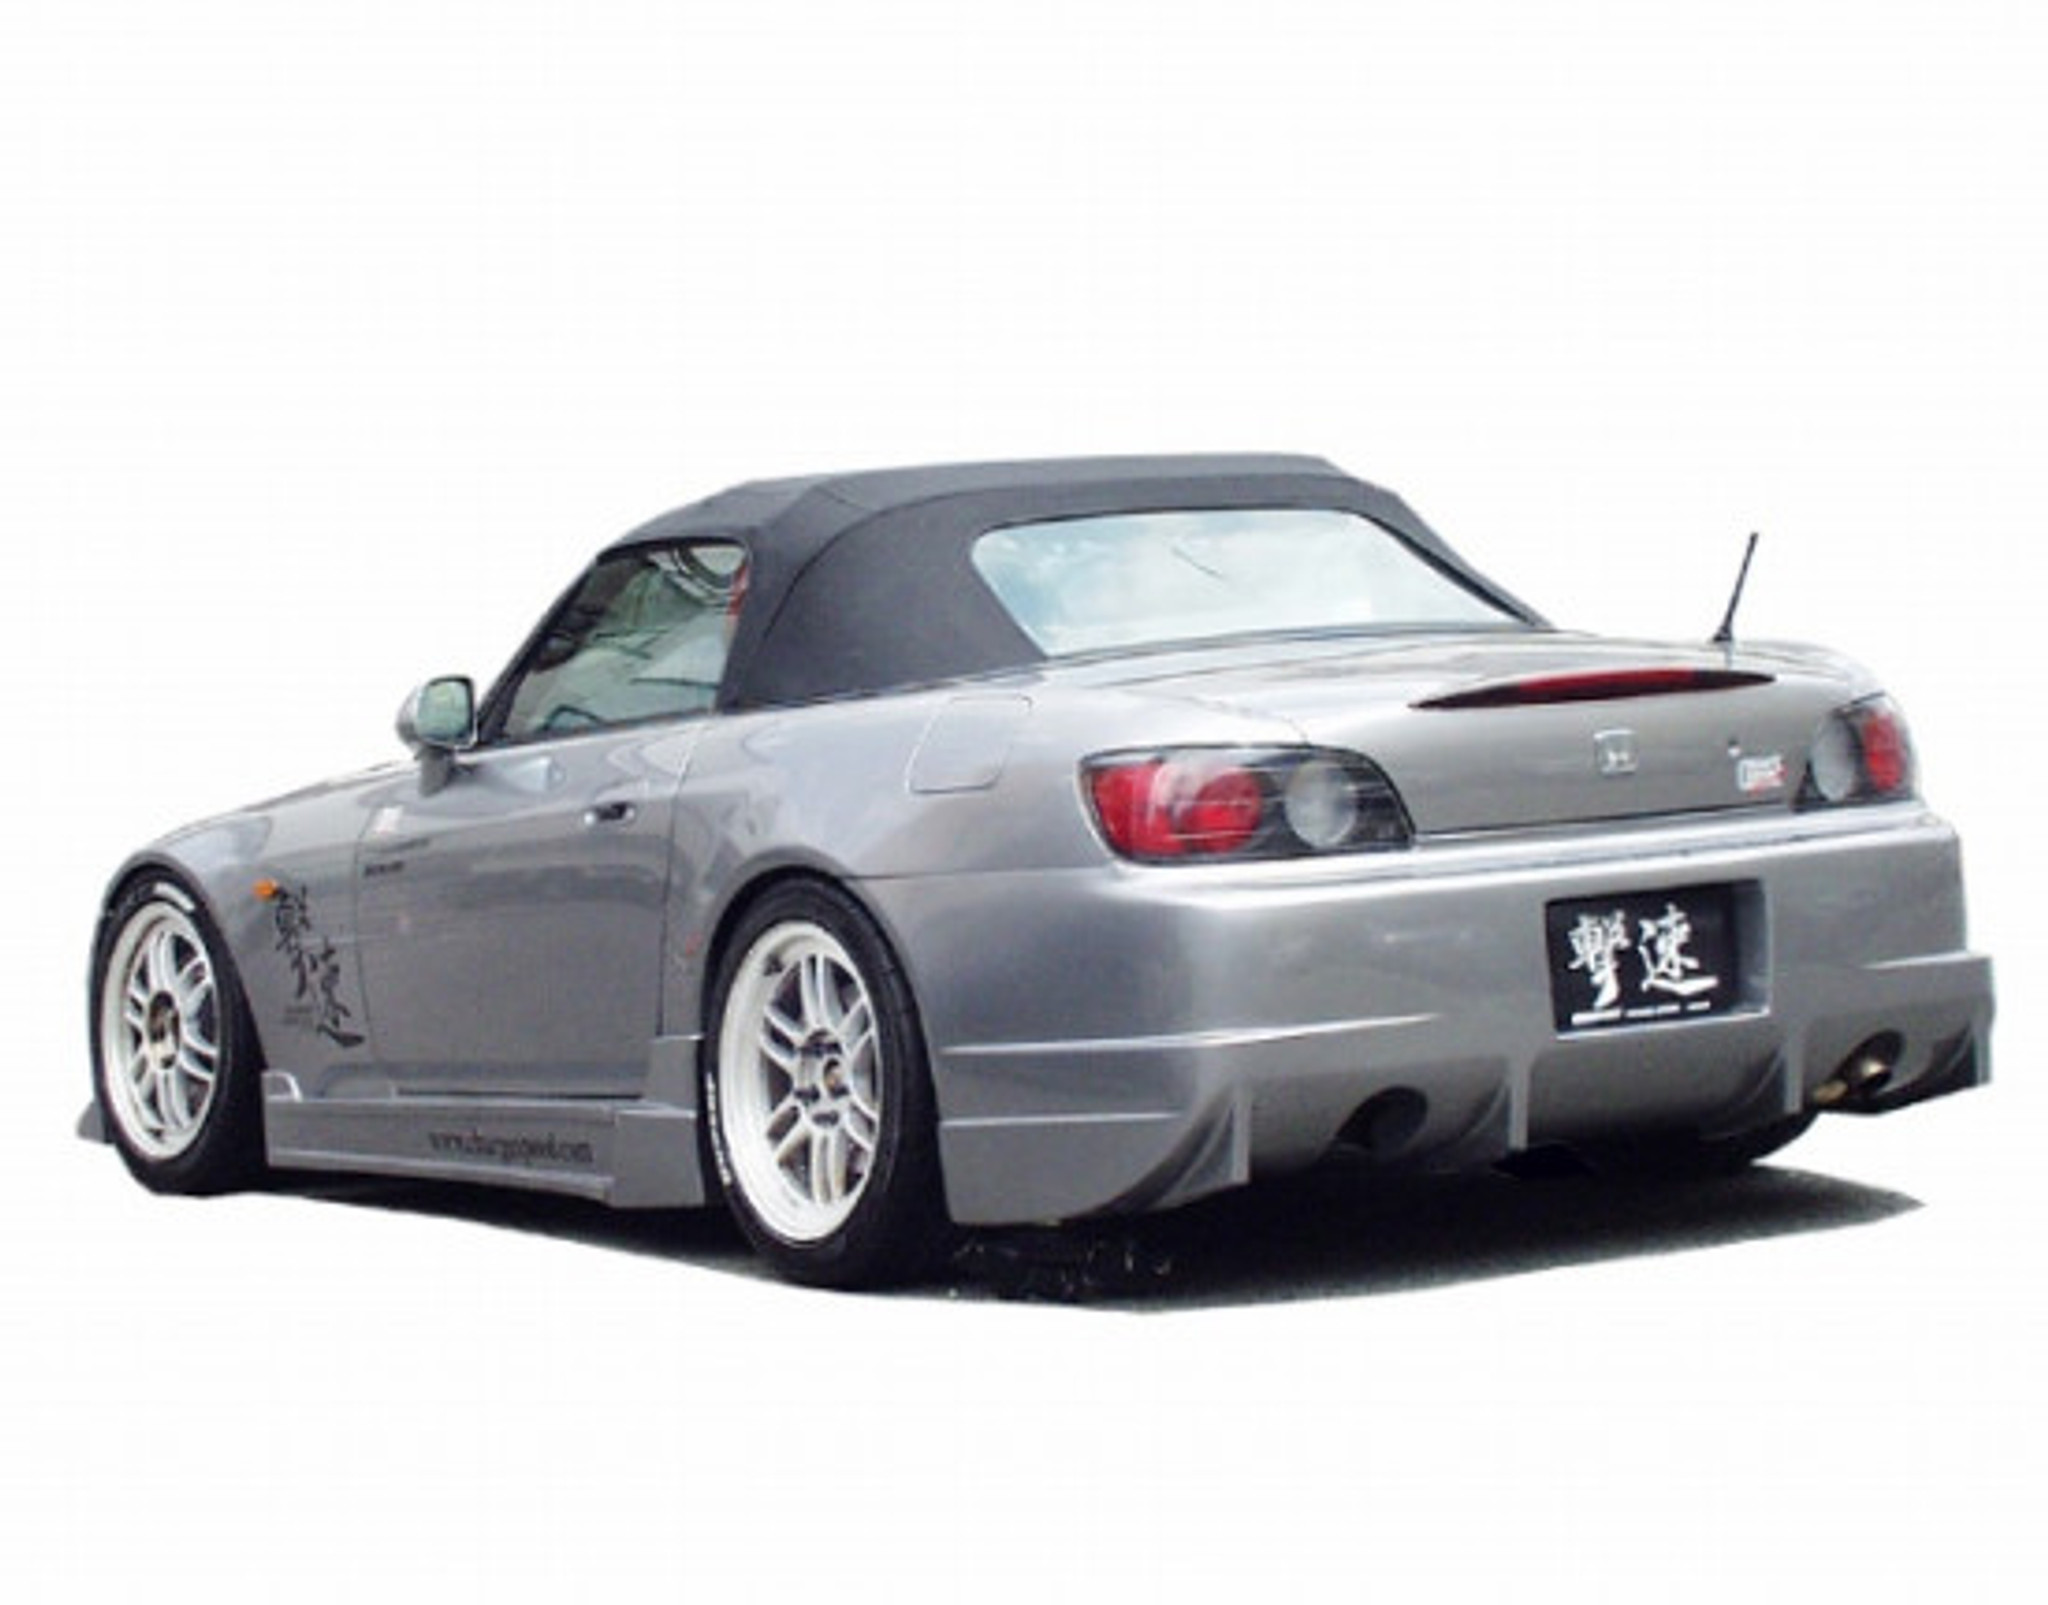 Custom Titanium-Infused 2006 Honda S2000 Stays Fresh With a Rotation of  Parts